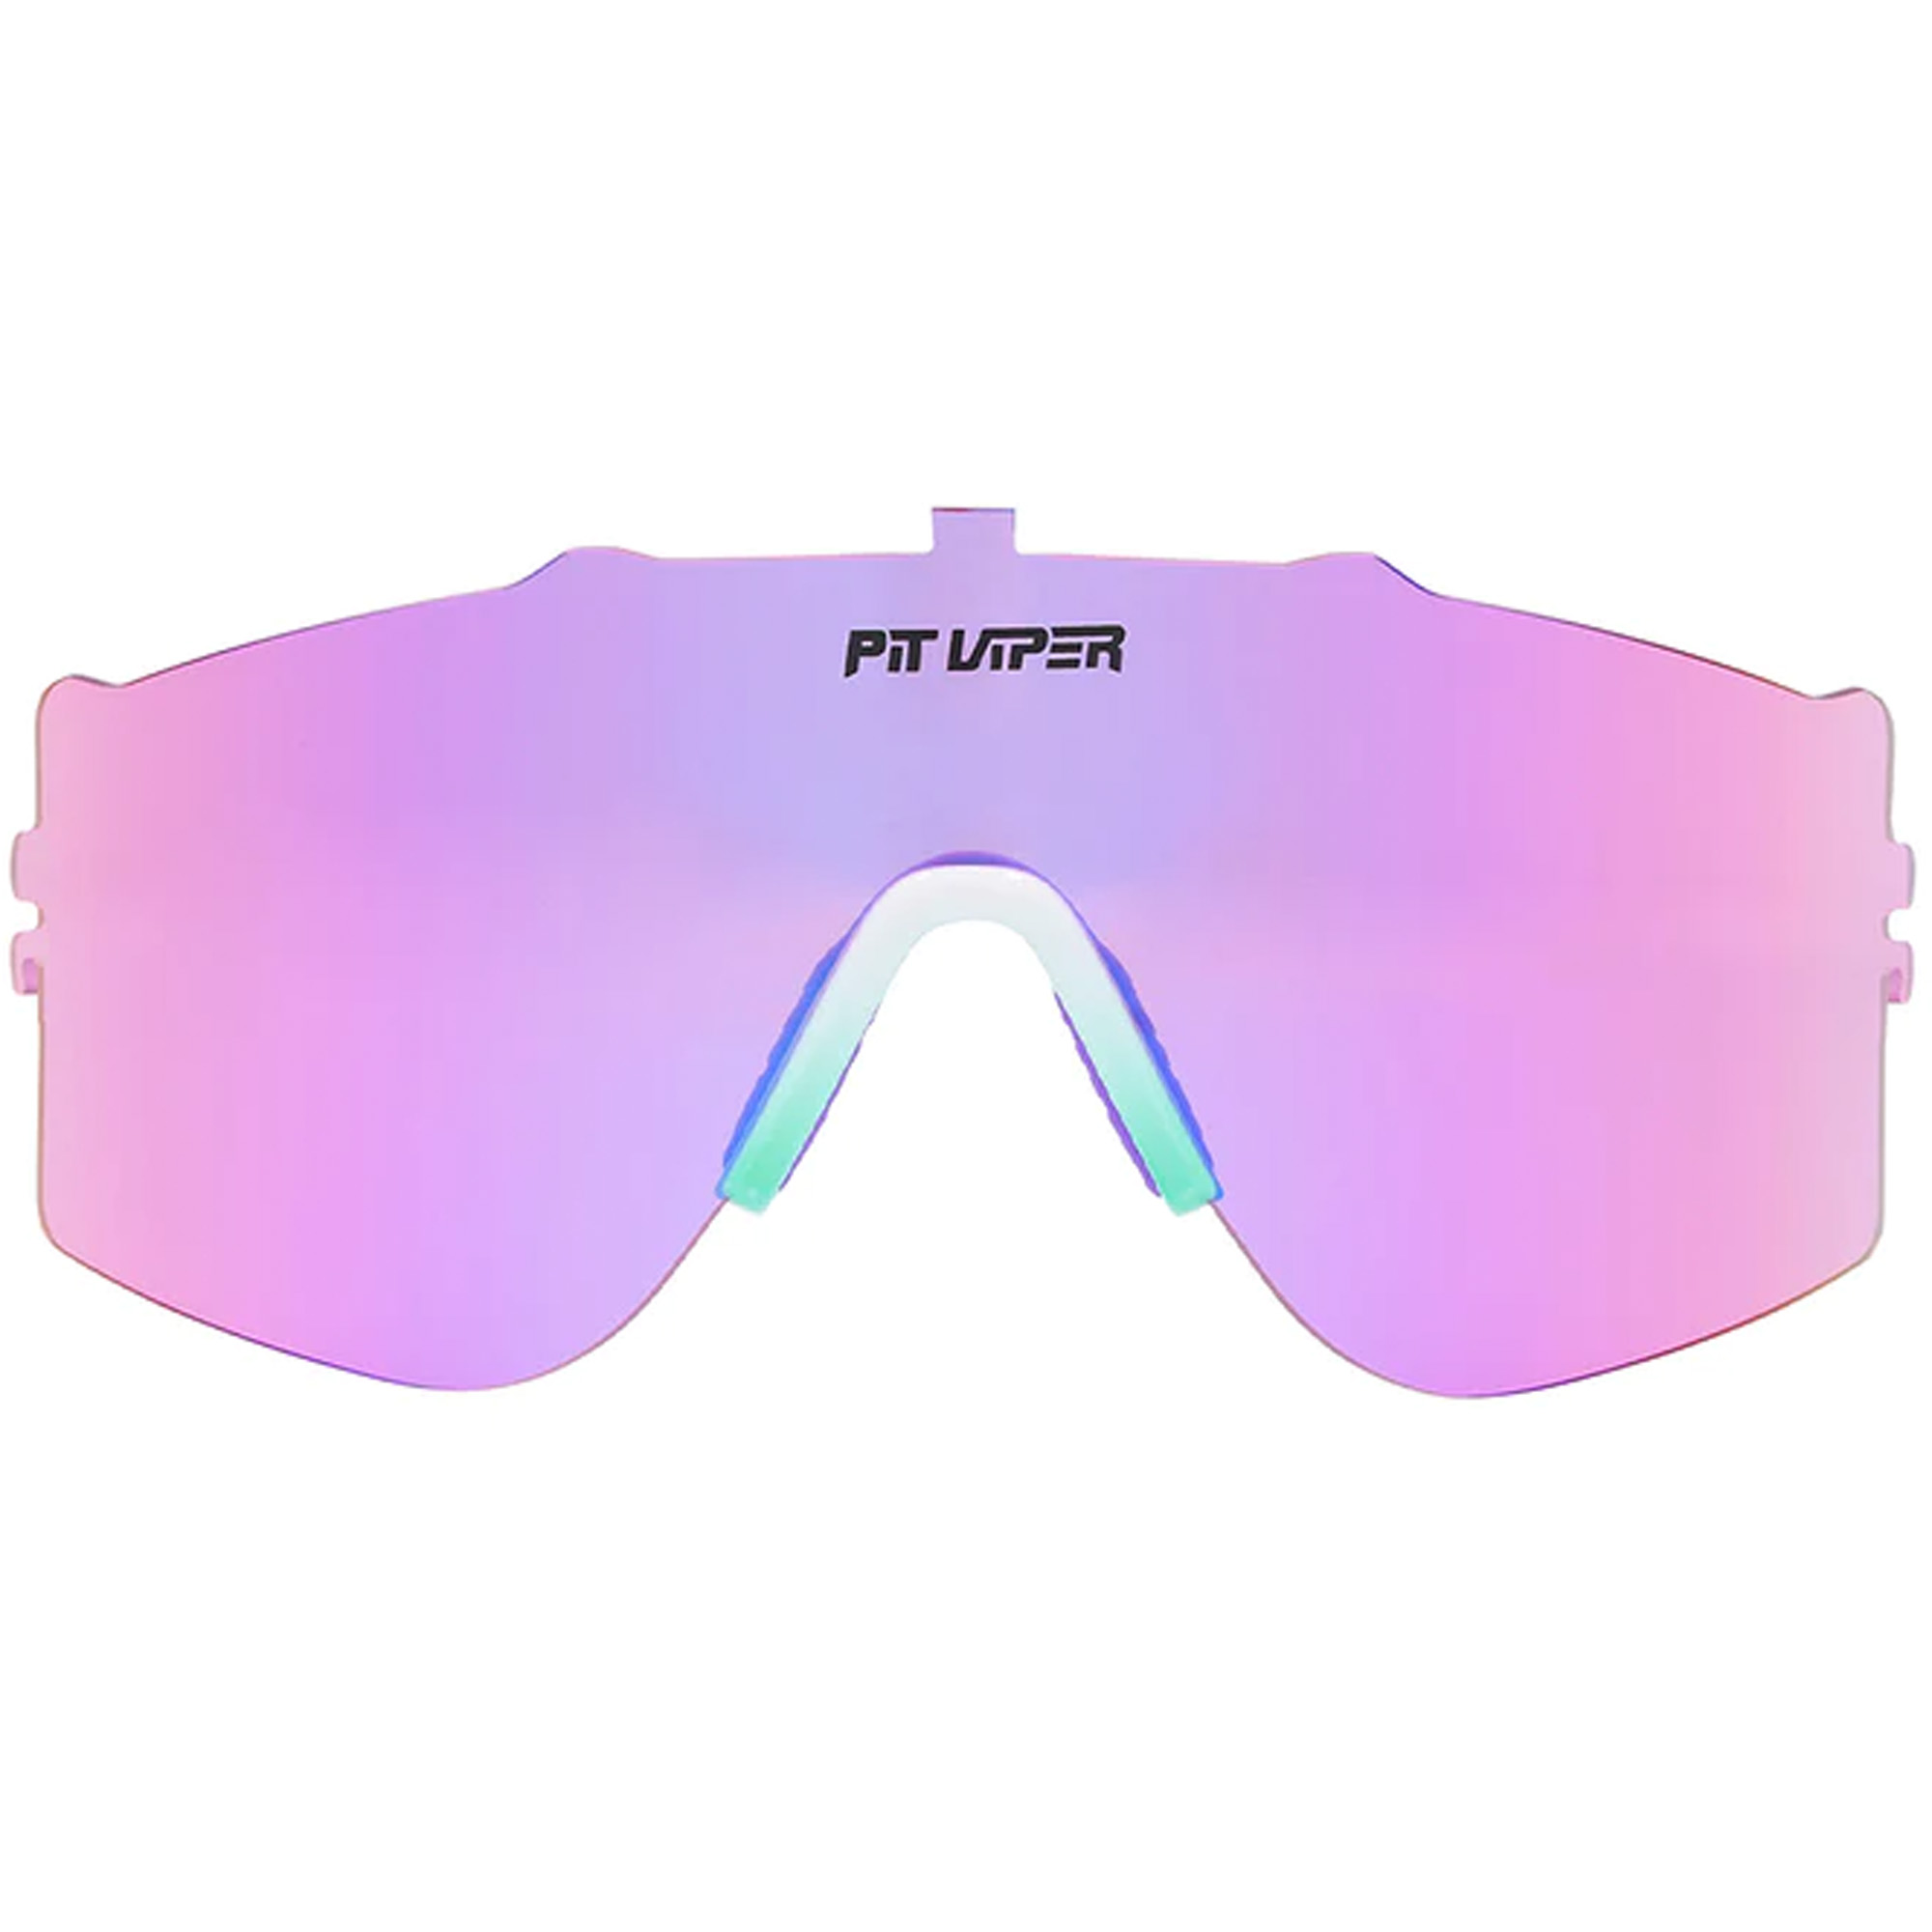 Pit Viper The Try-Hard  Sunglasses